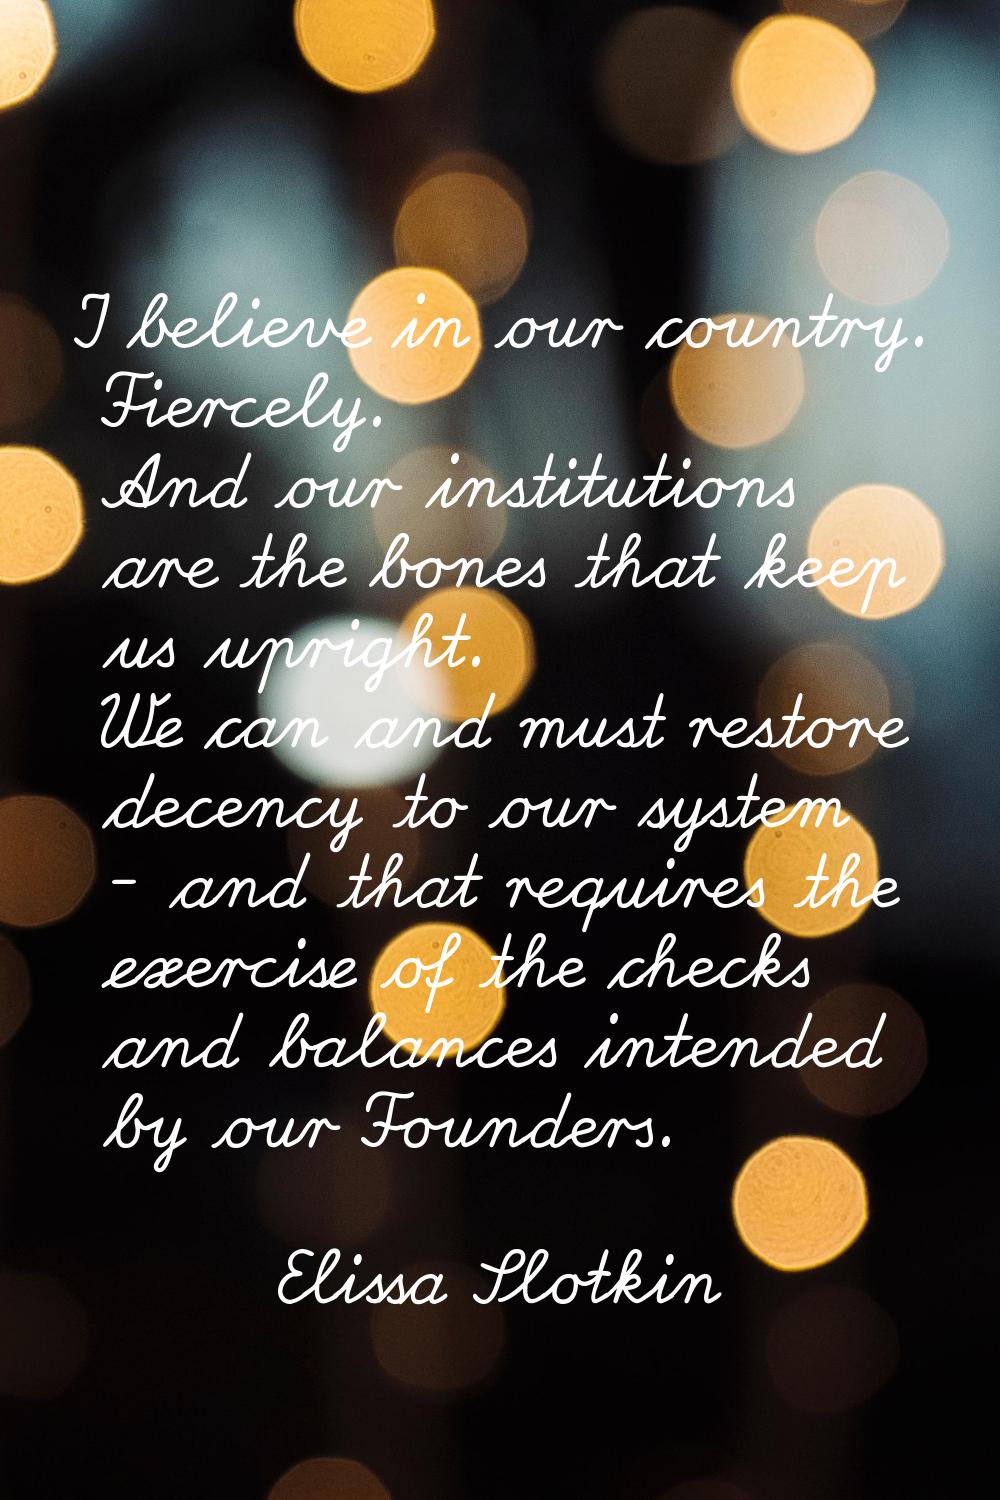 I believe in our country. Fiercely. And our institutions are the bones that keep us upright. We can